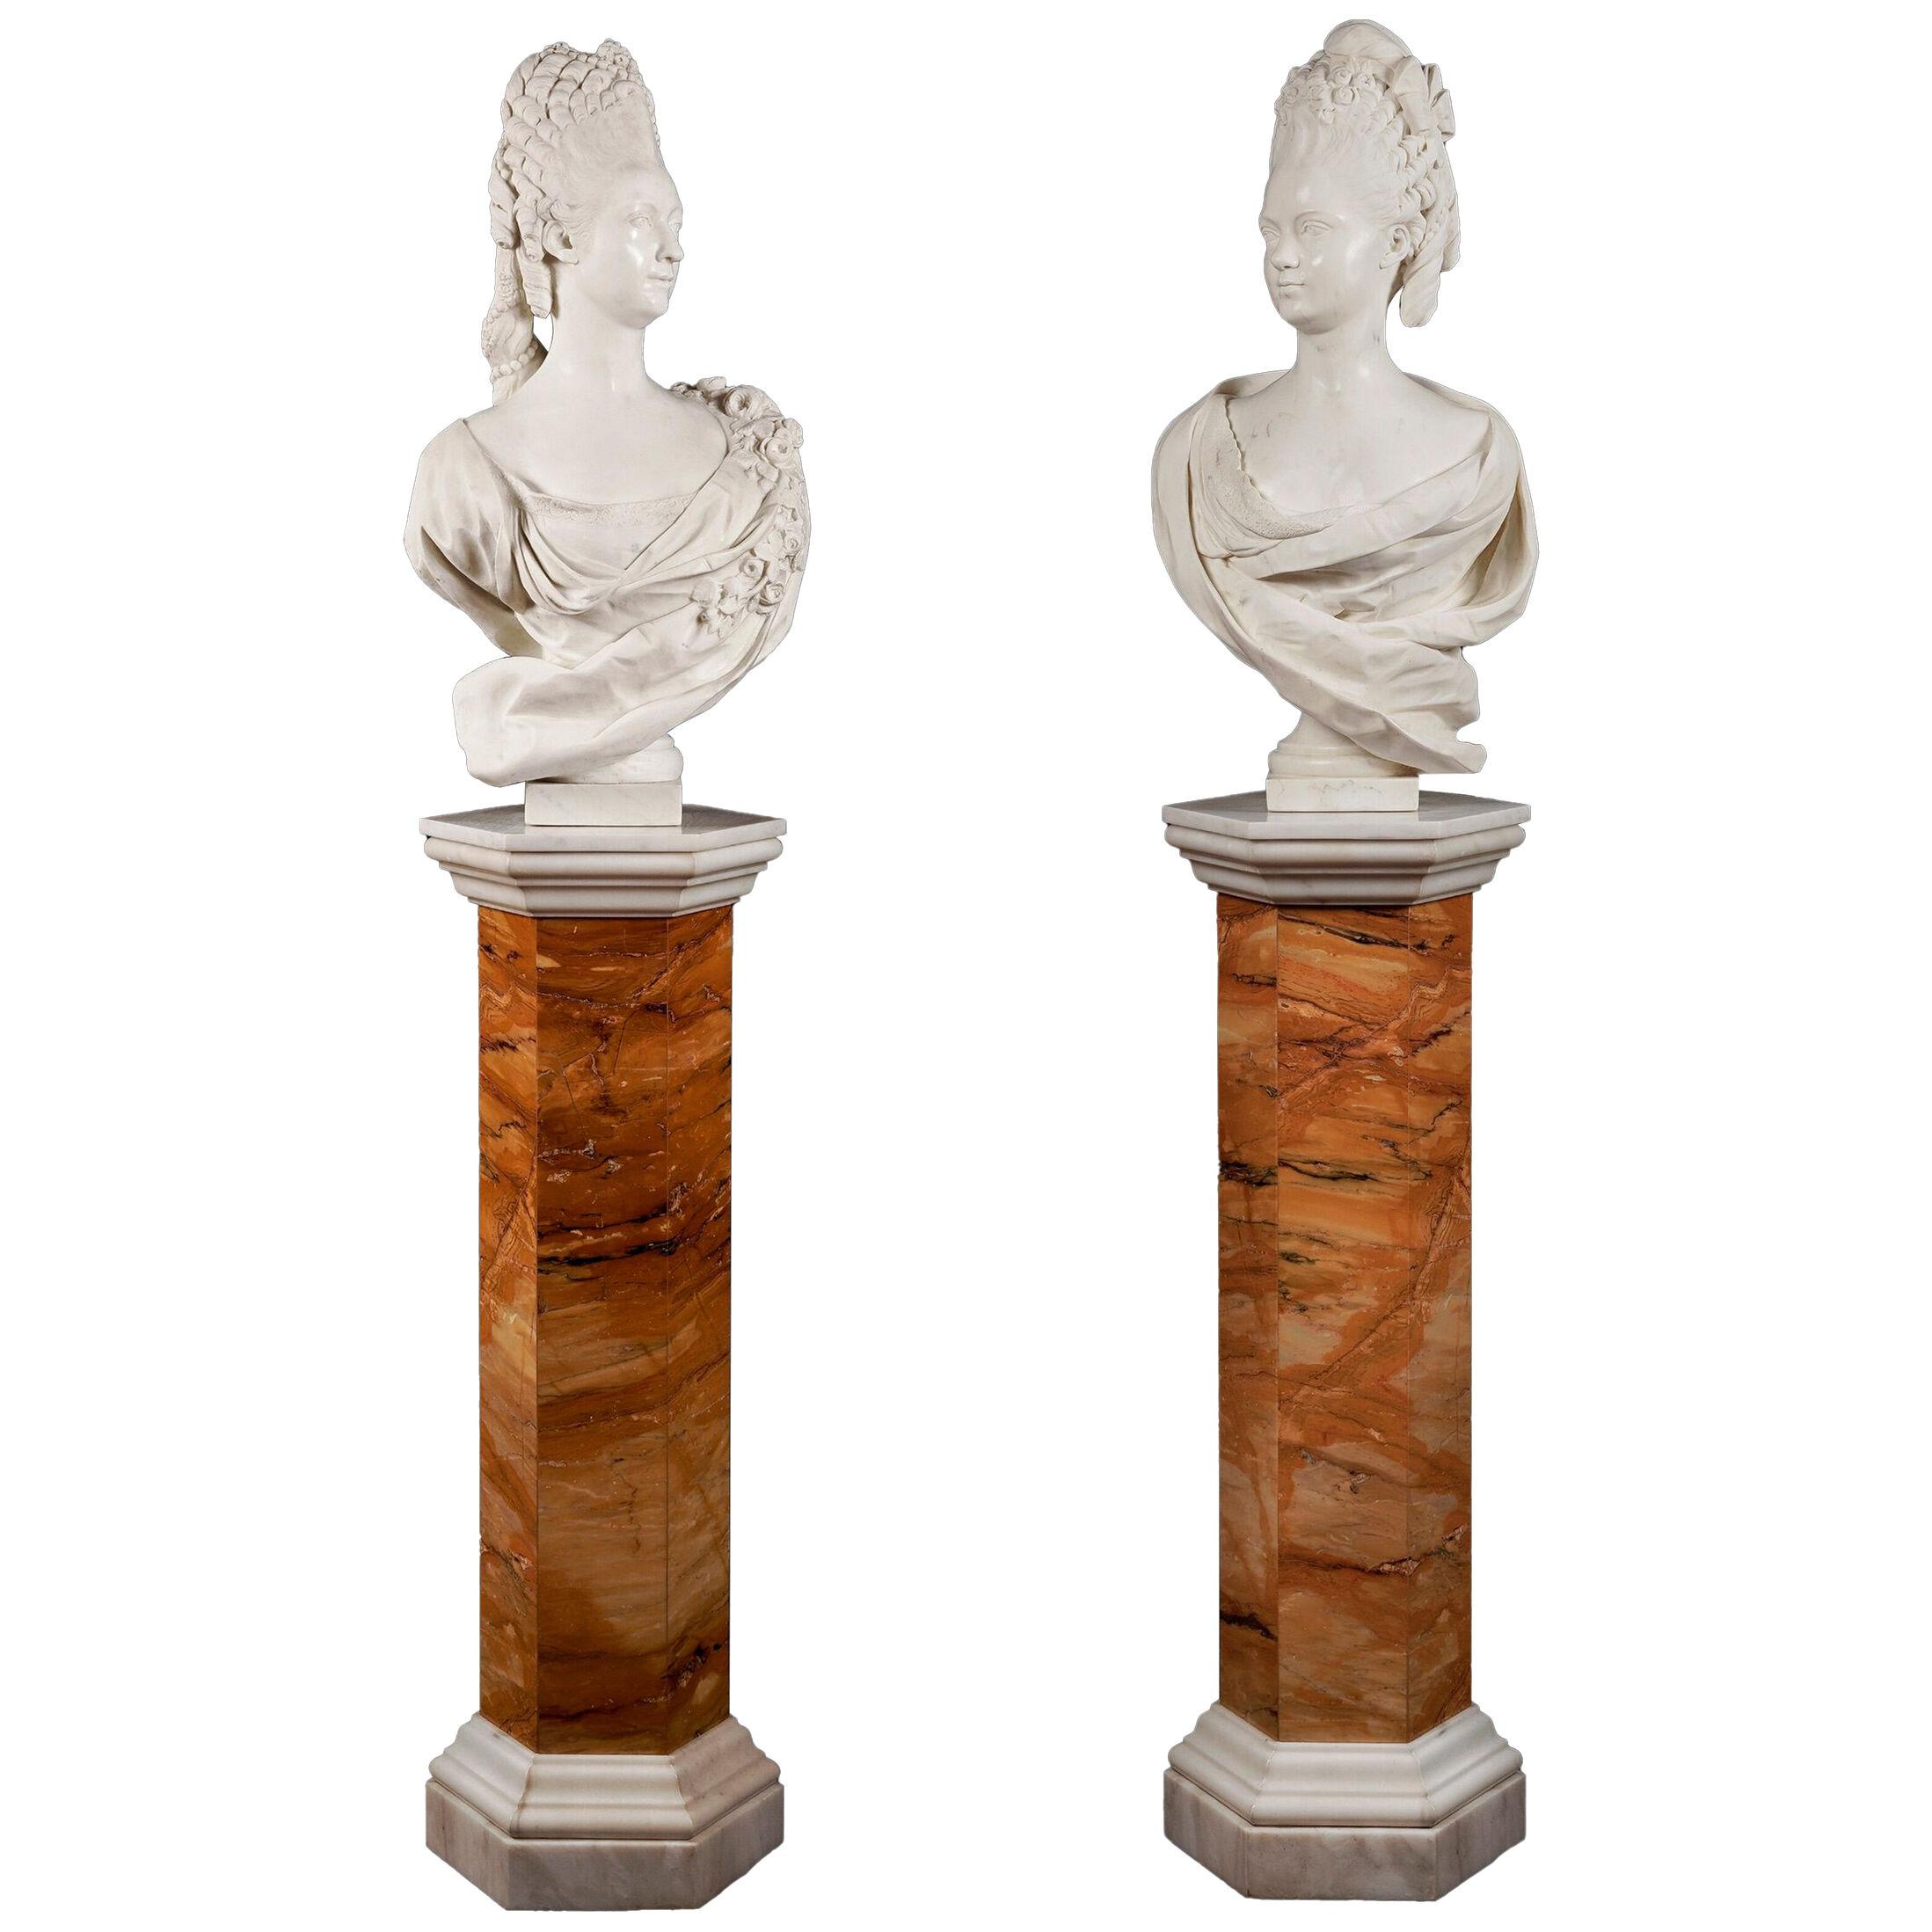 Pair of Carved Marble Royal Busts on Pedestals